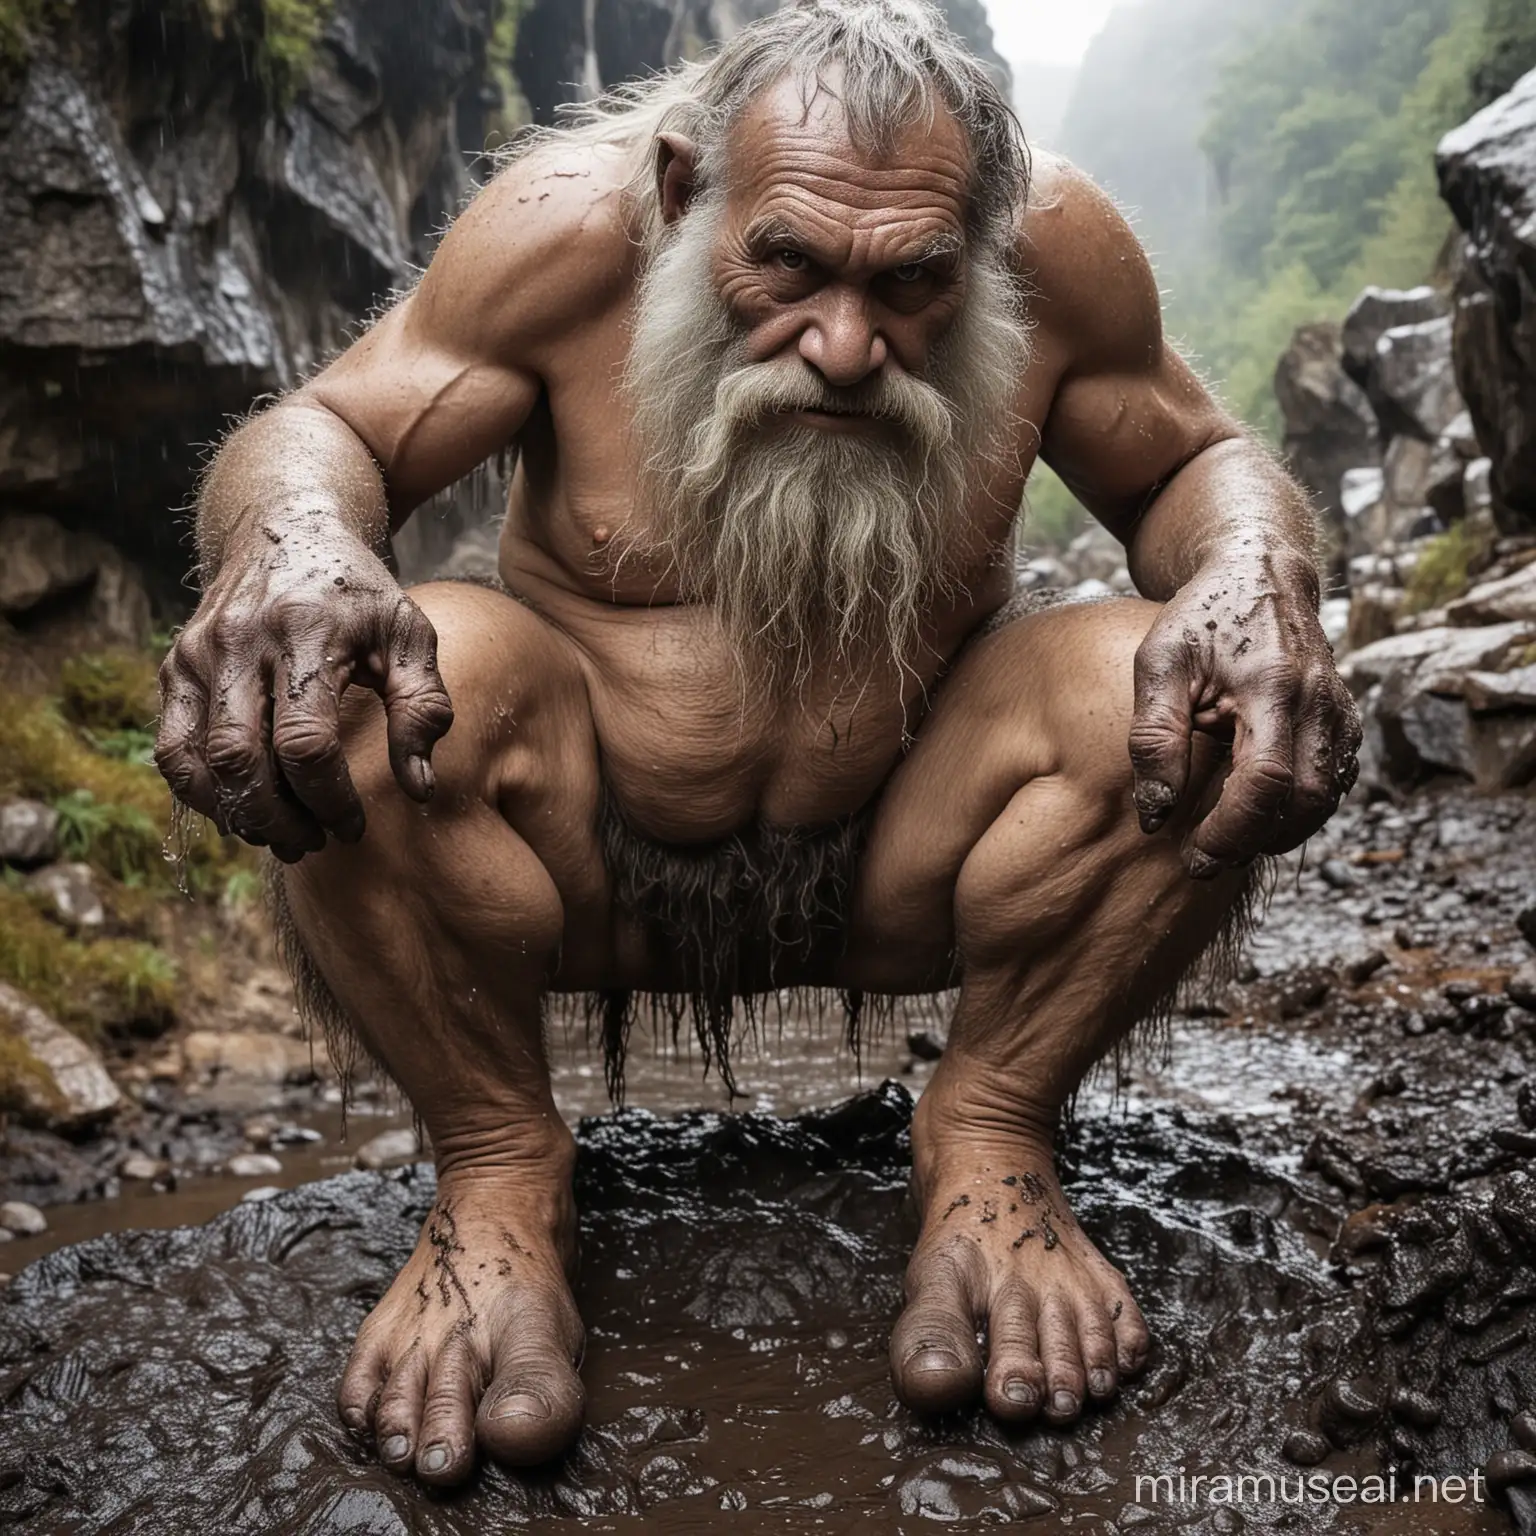 troll,large feet,large hand,loincloth,dumpy,chubby,primitive,hairy,long beard,old age,rainy,wet dirty black mud cover hand and feet,in the mountain,rock climbing